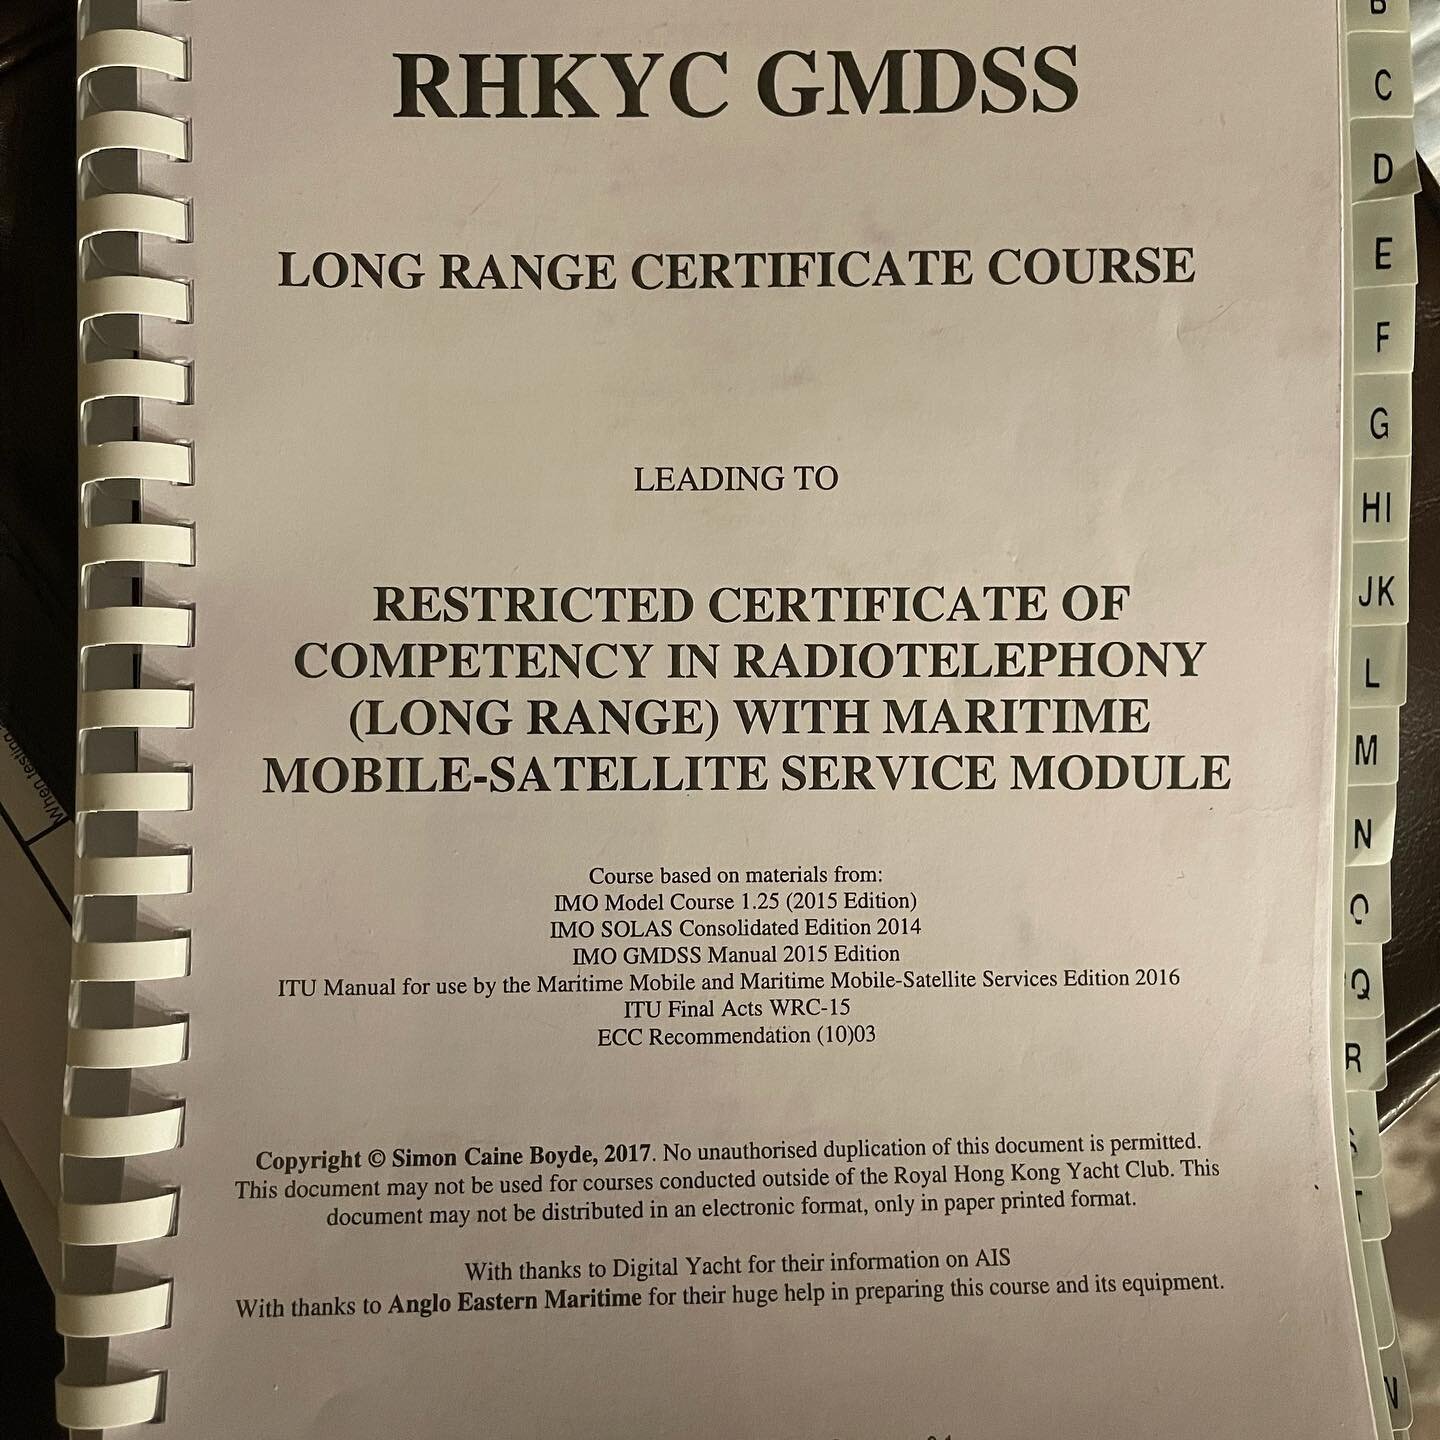 Long Range Radio / GMDSS course almost complete allowing me to be a marine HF/MF radio operator. 🤞#hfradio #dsc